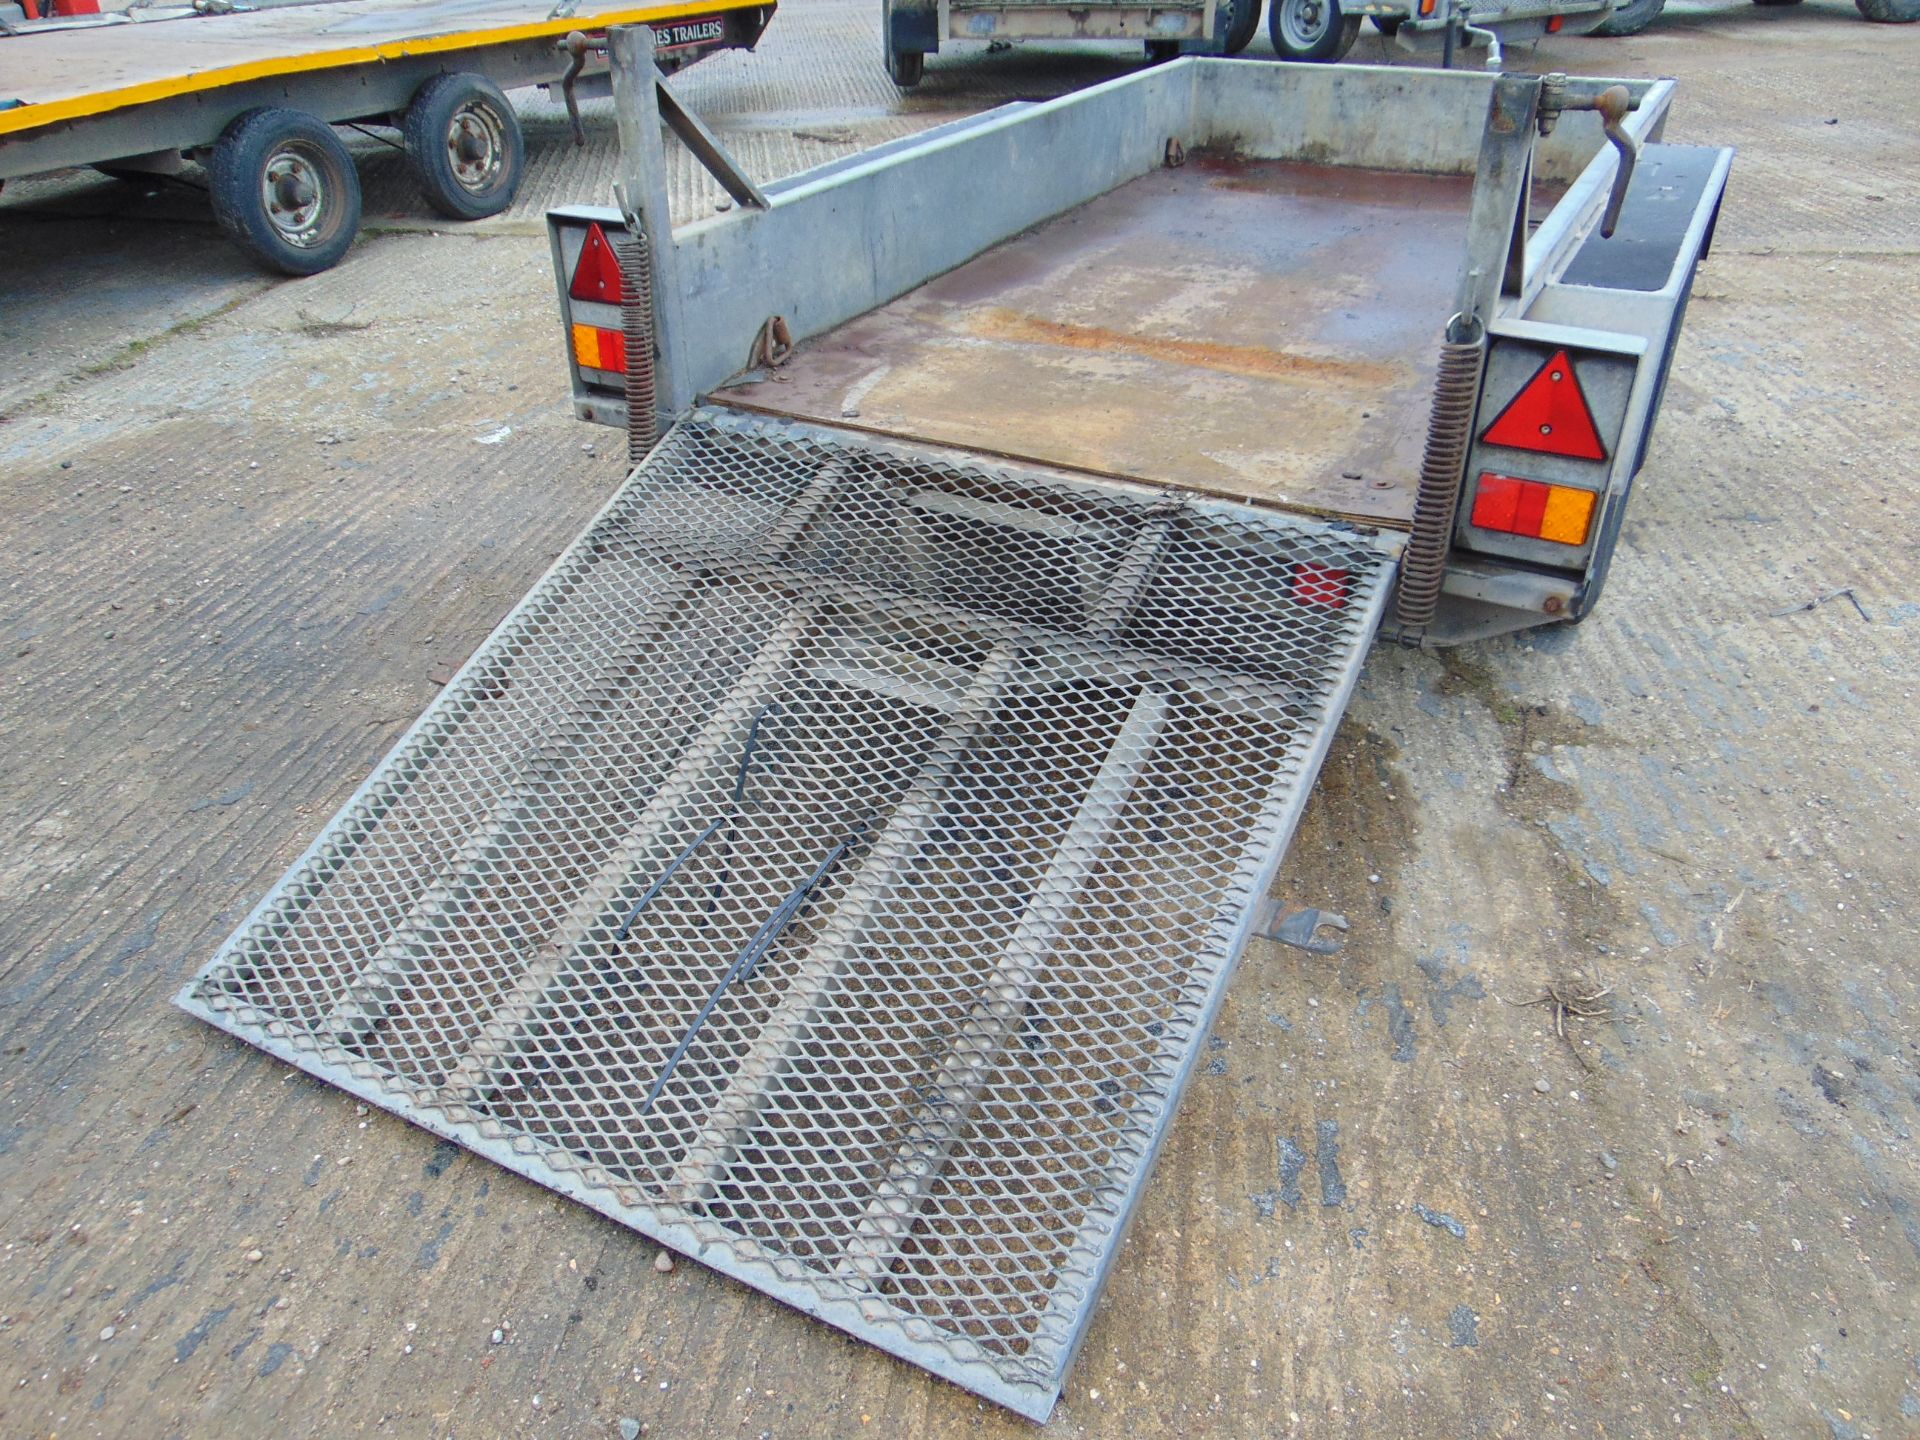 Heritage 2.4 Tonne Twin Axle Plant Trailer c/w Ramps - Image 7 of 10